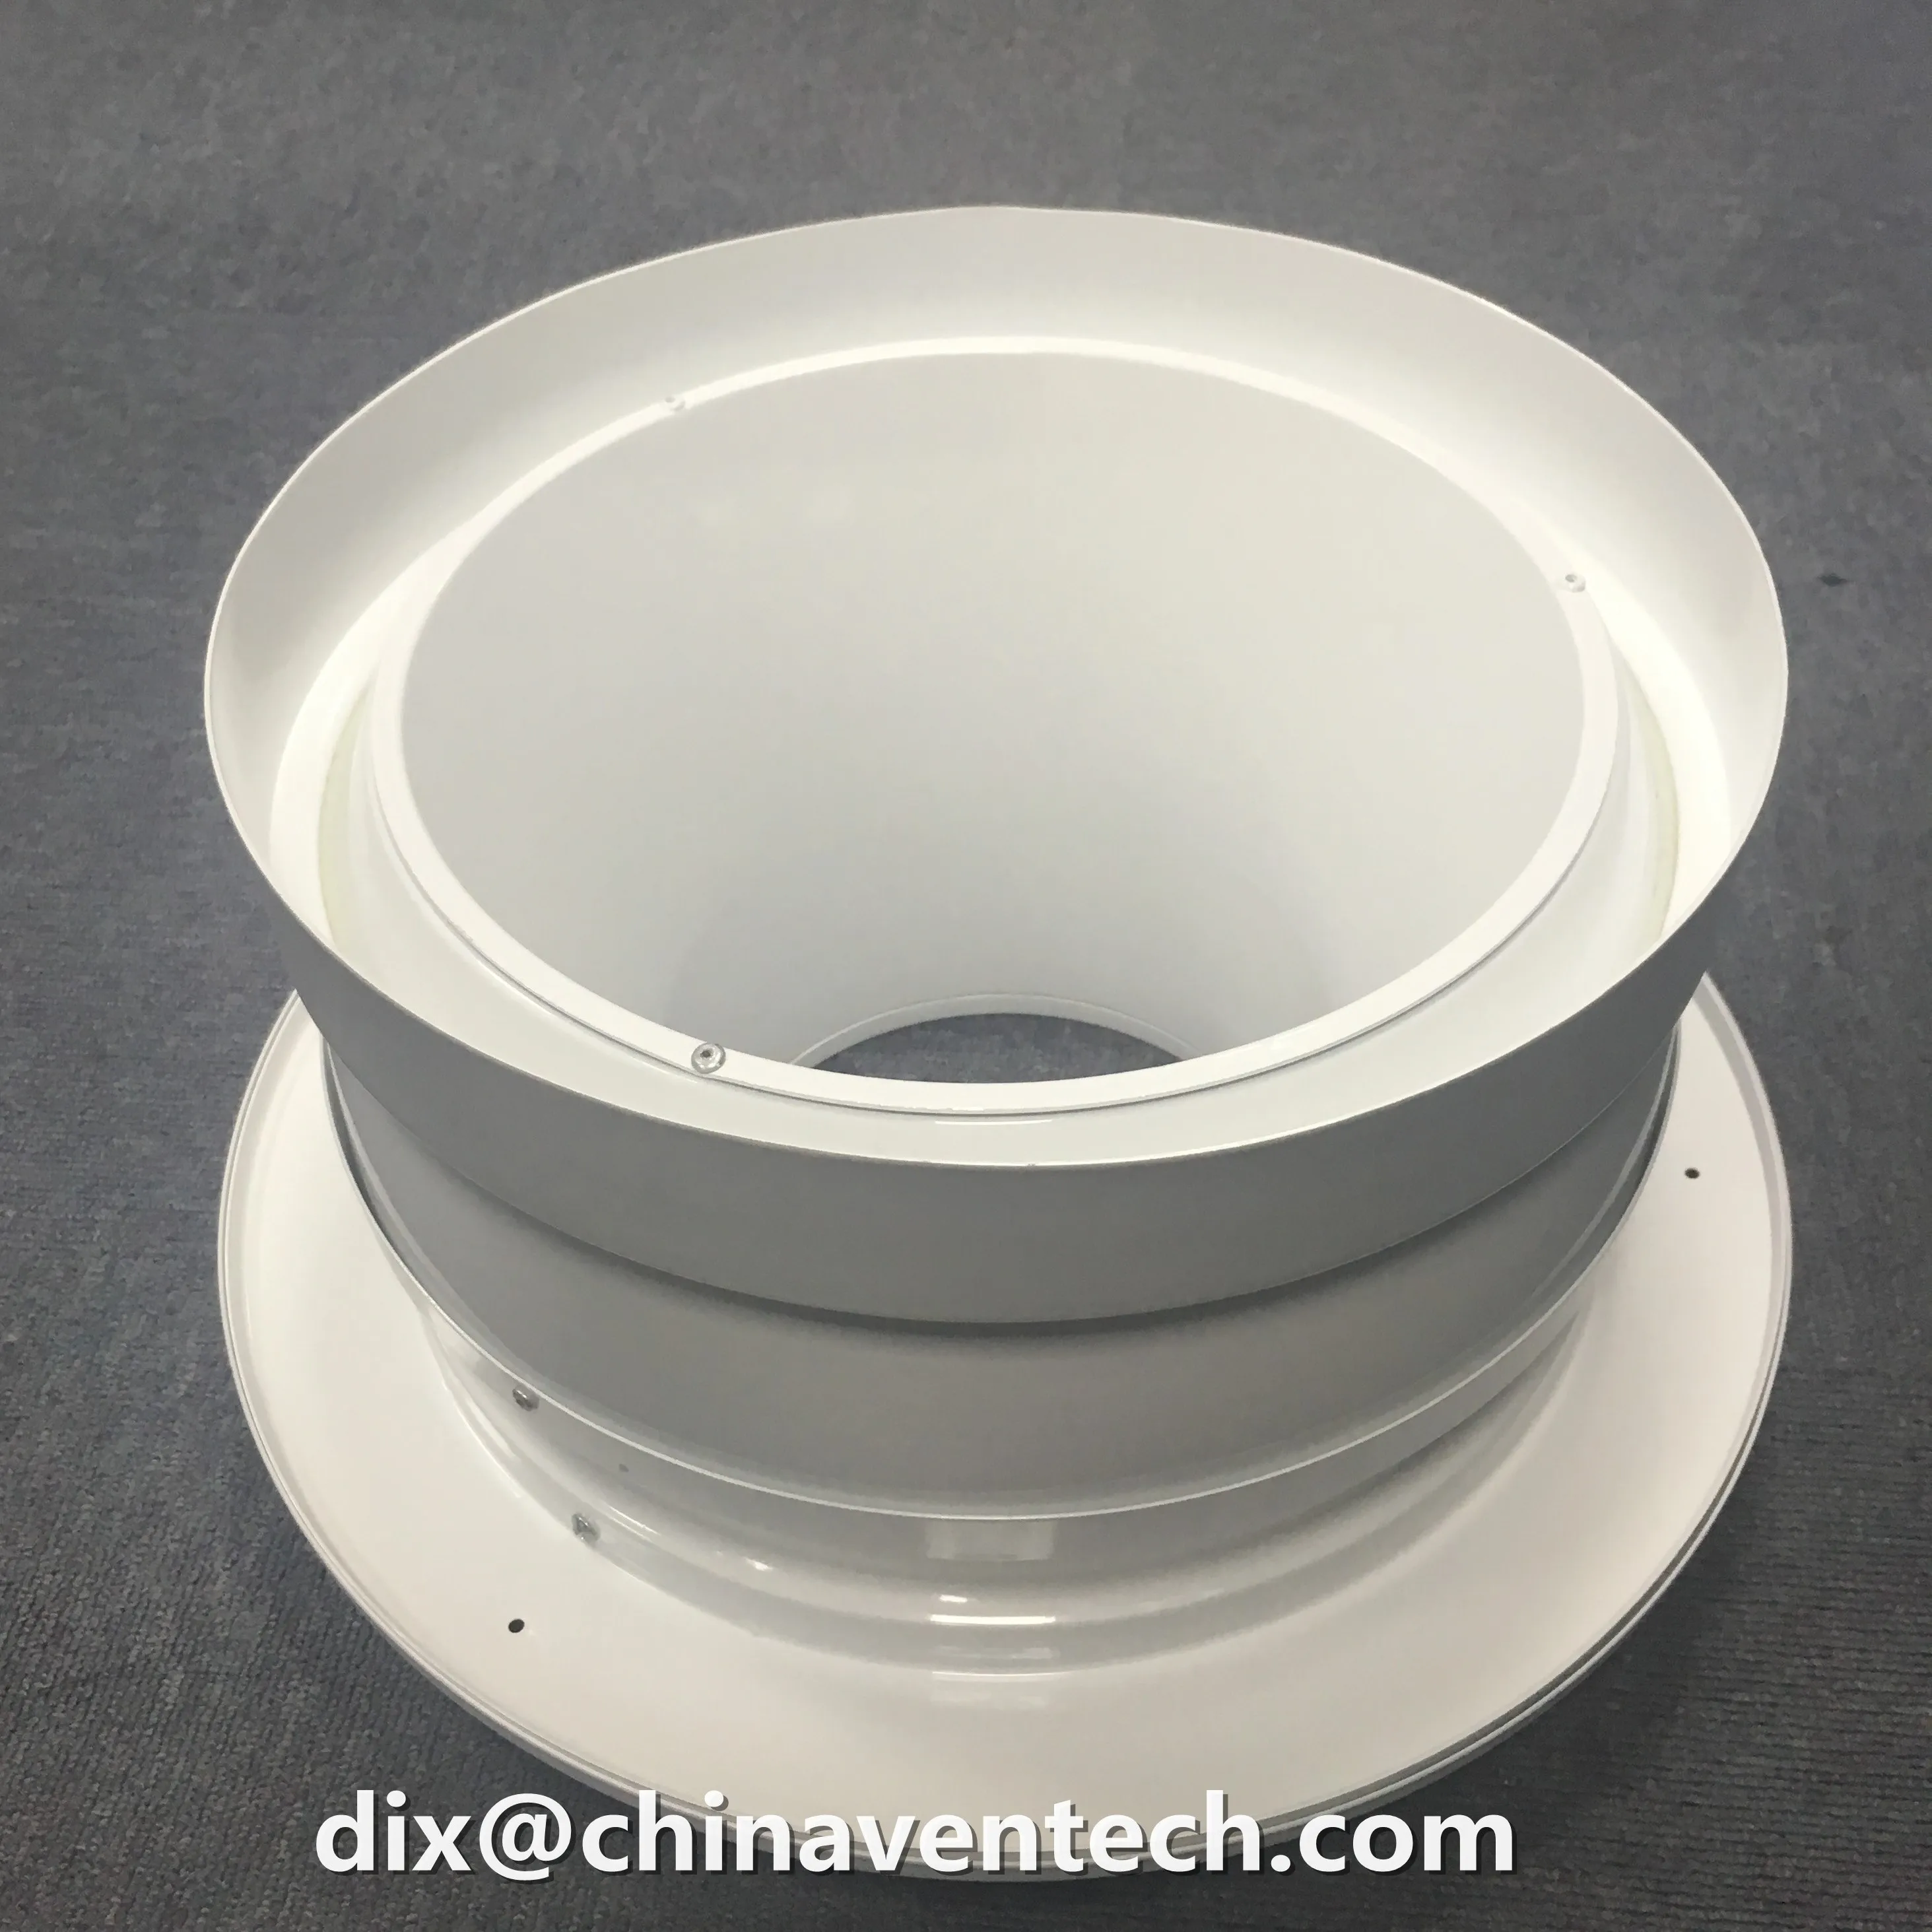 Hvac side wall mounted duct work ventilation round air grille ball jet diffuser